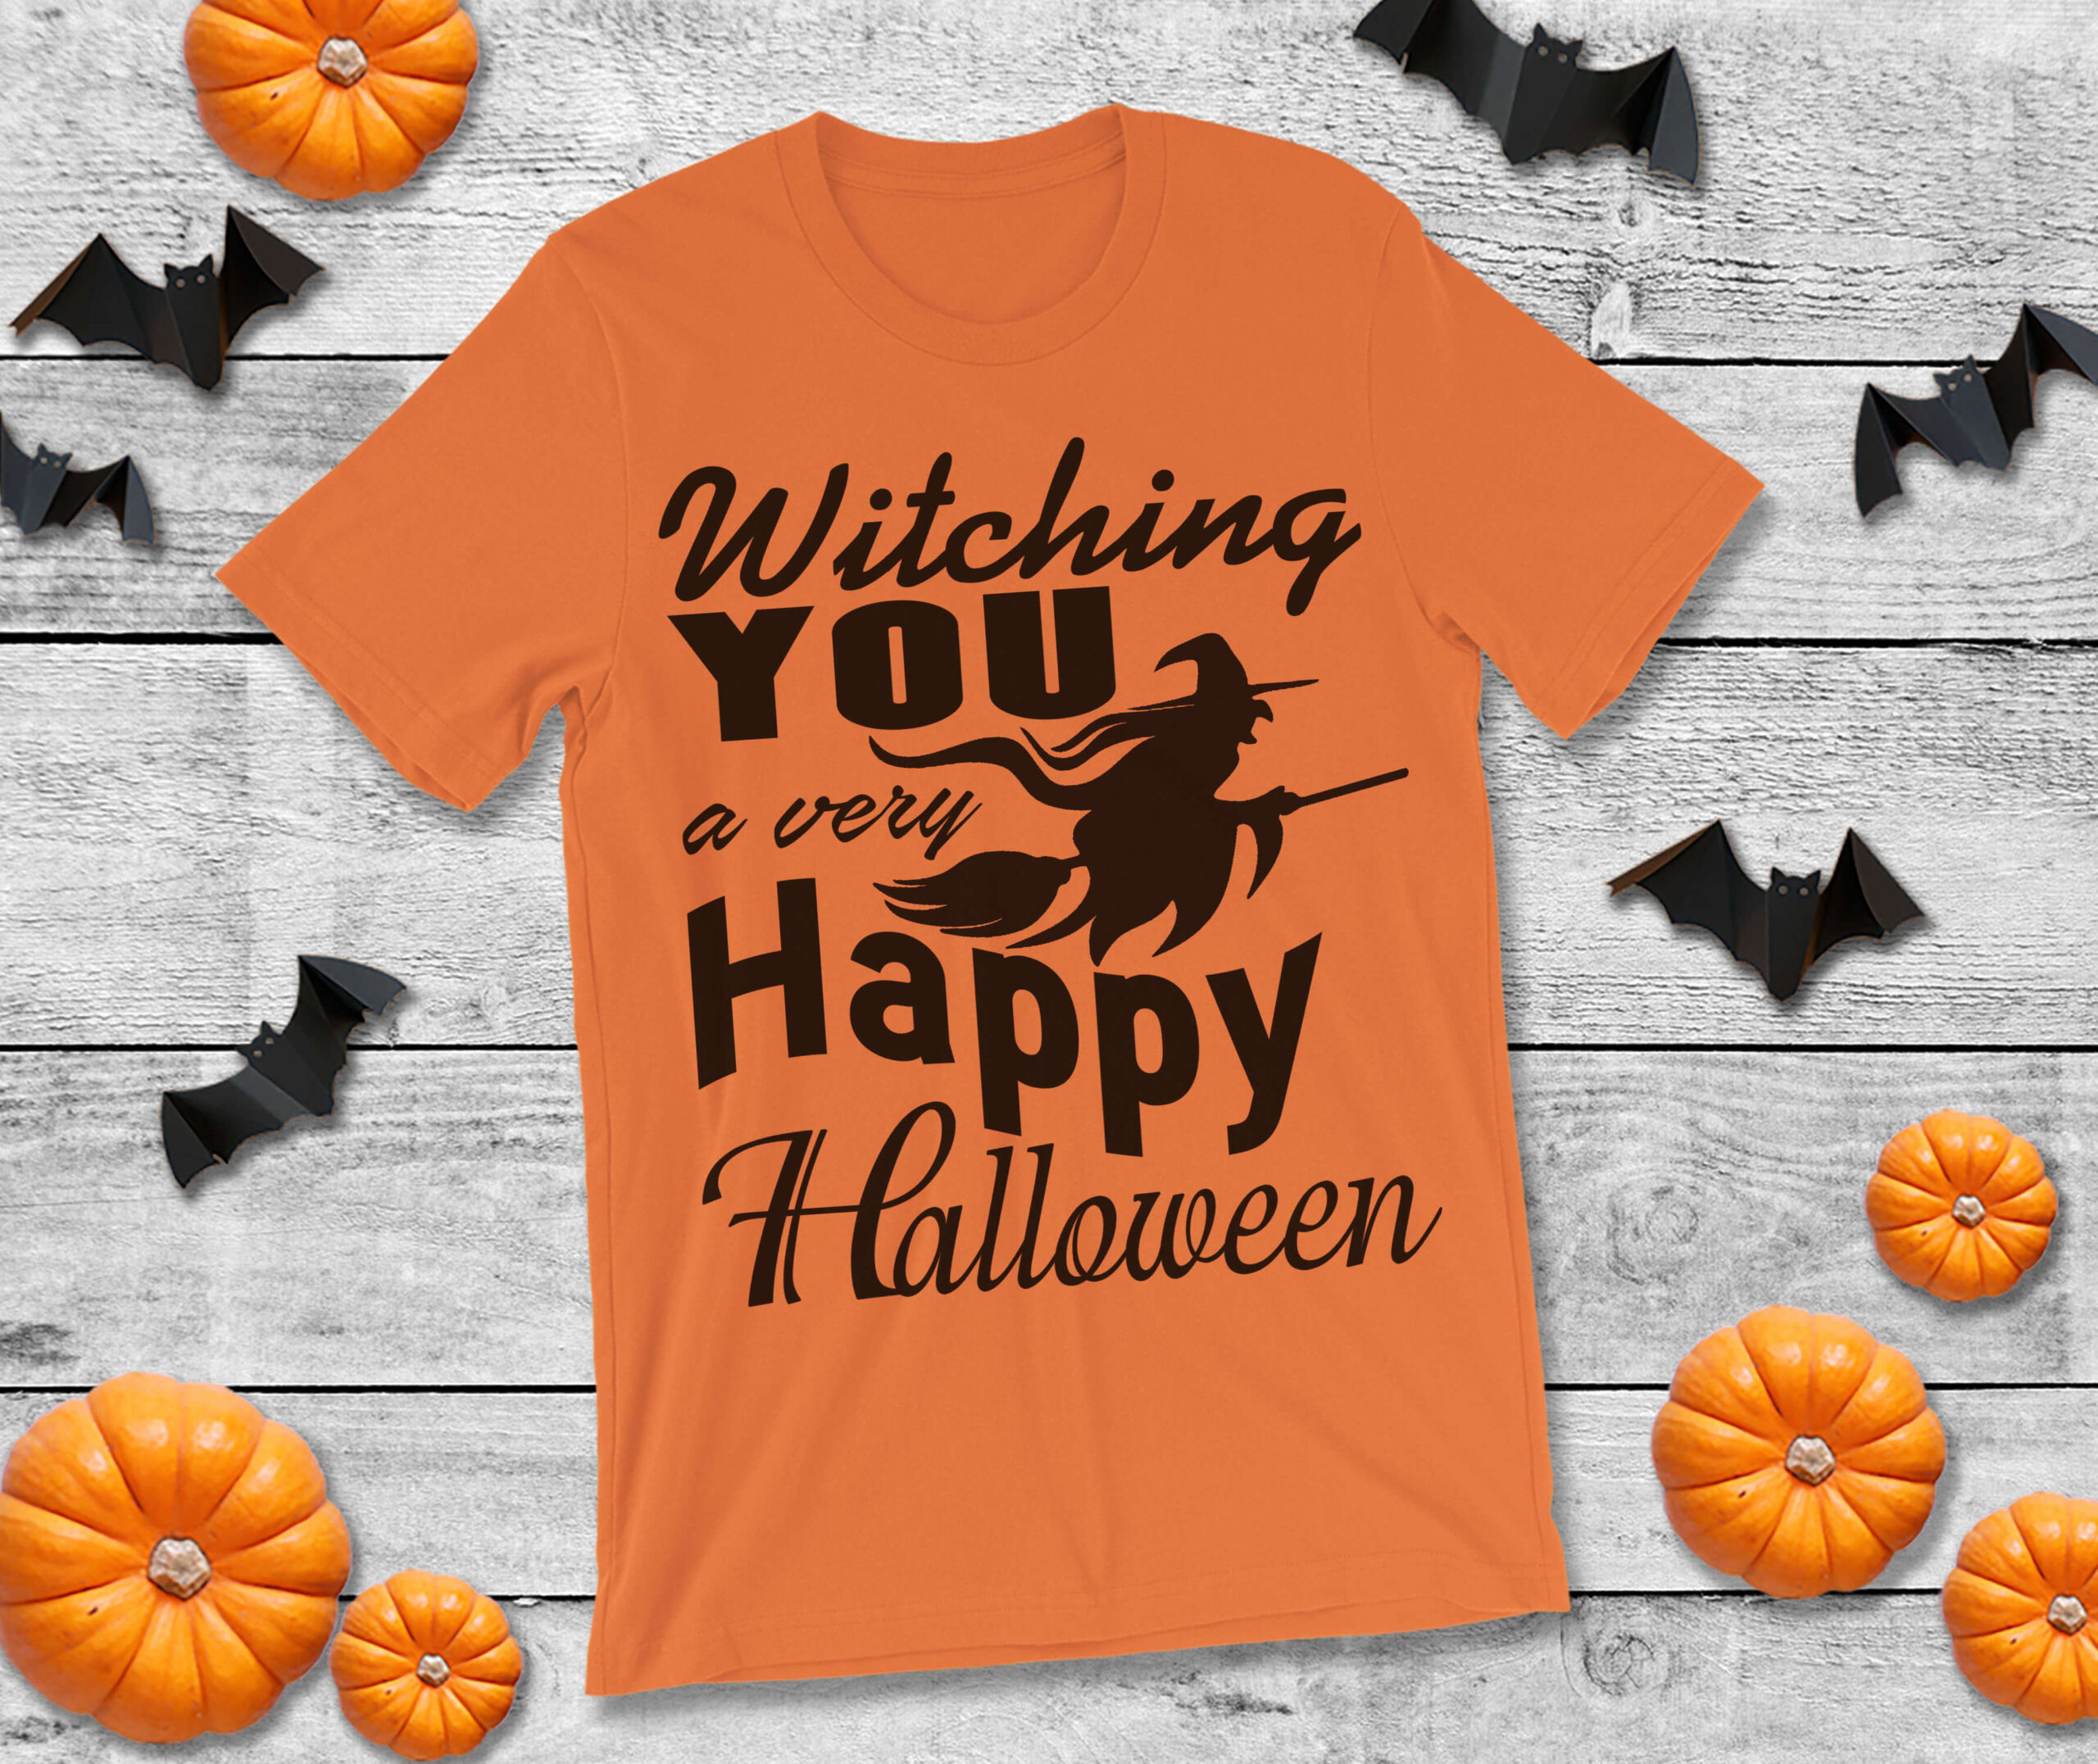 Free Witching You SVG File